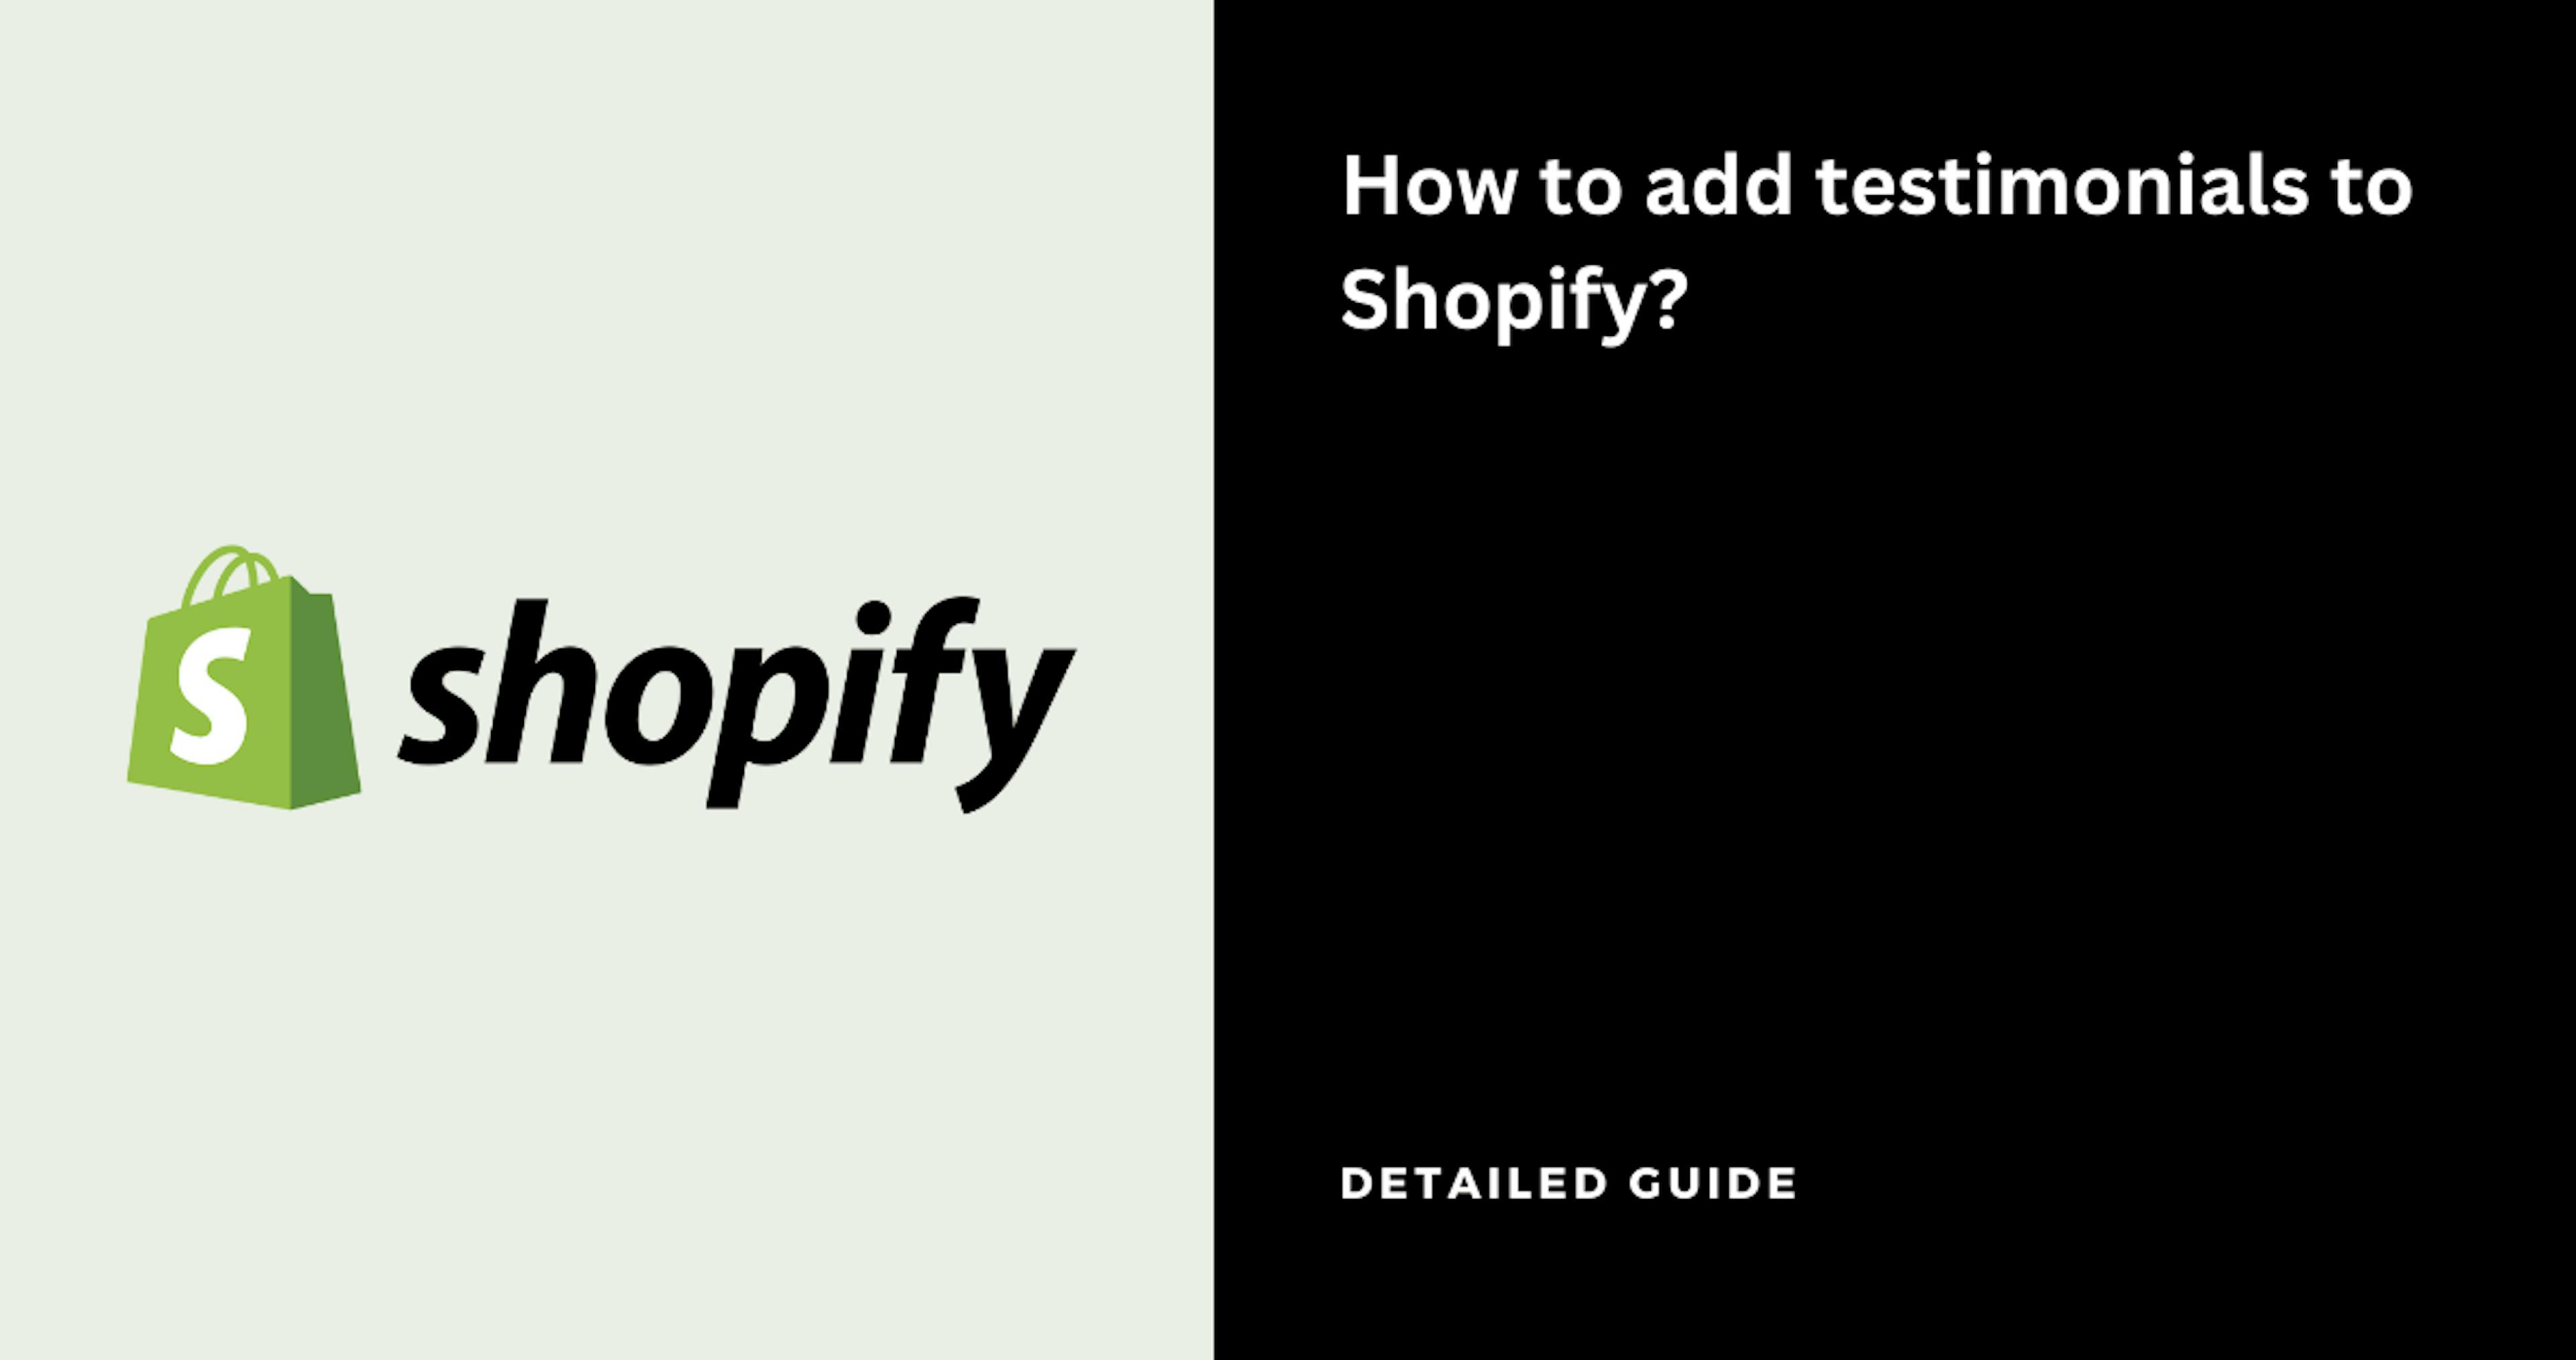 How to add testimonials to Shopify?